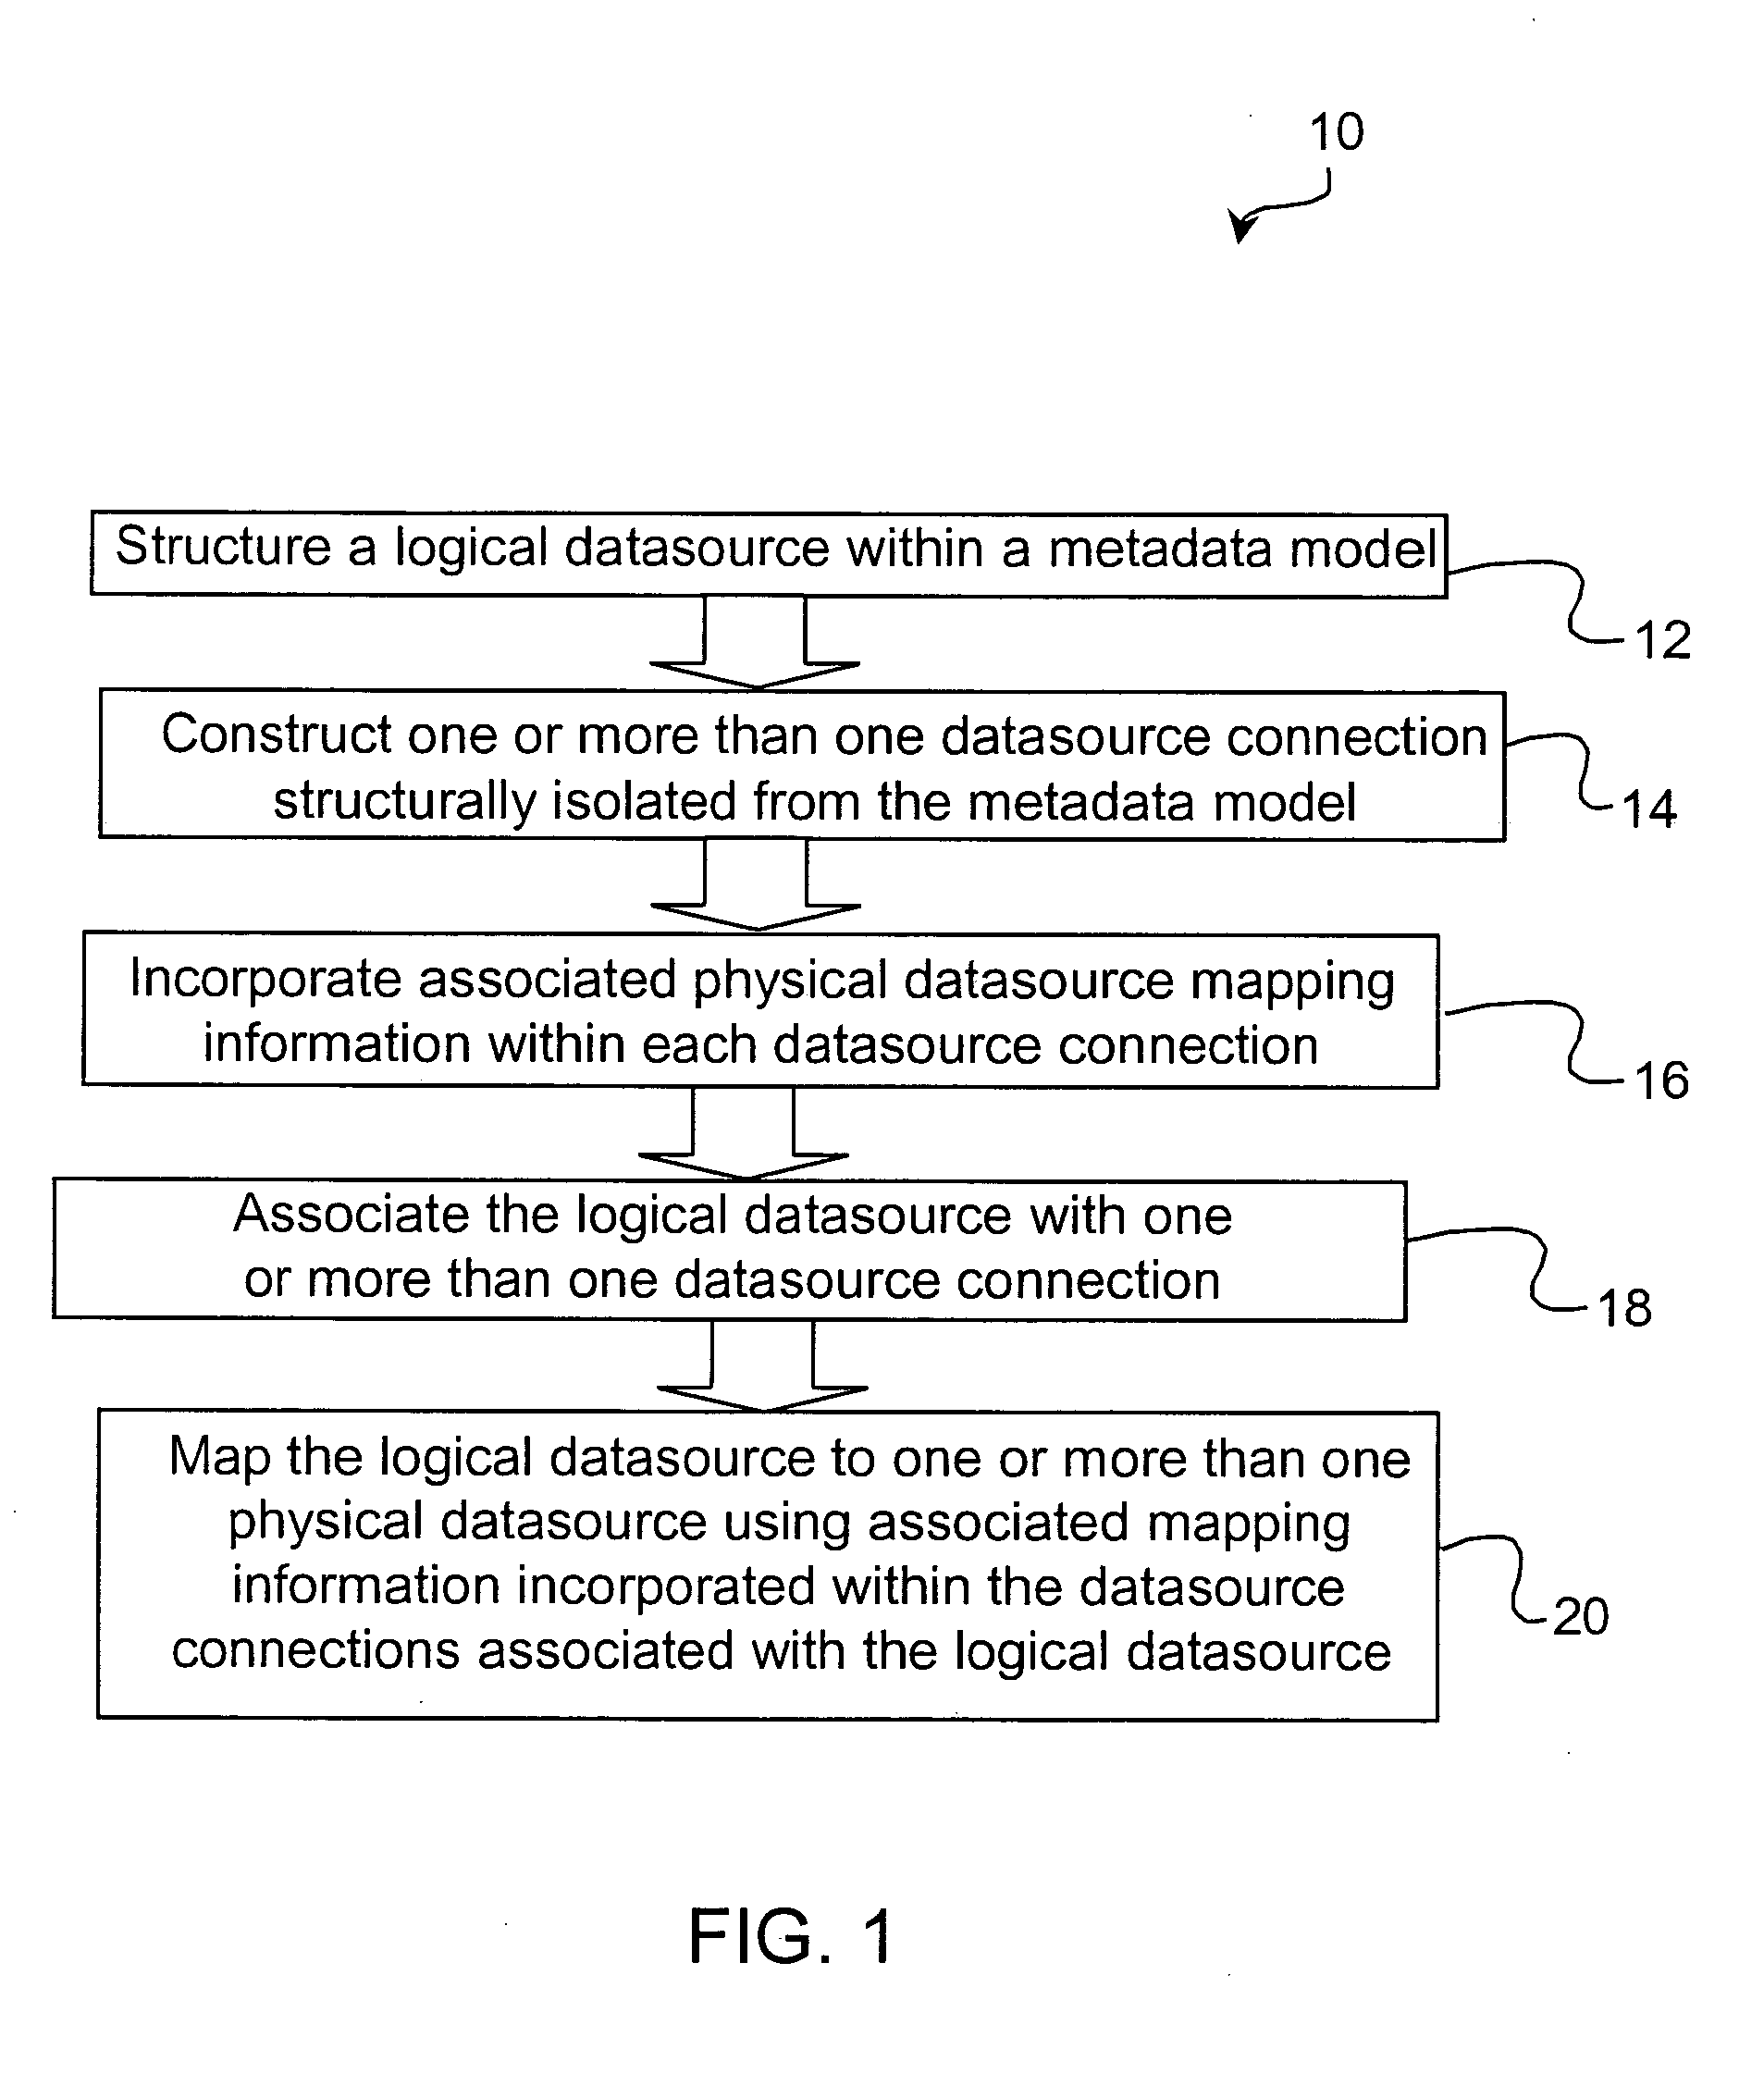 Method and system for mapping datasources in a metadata model